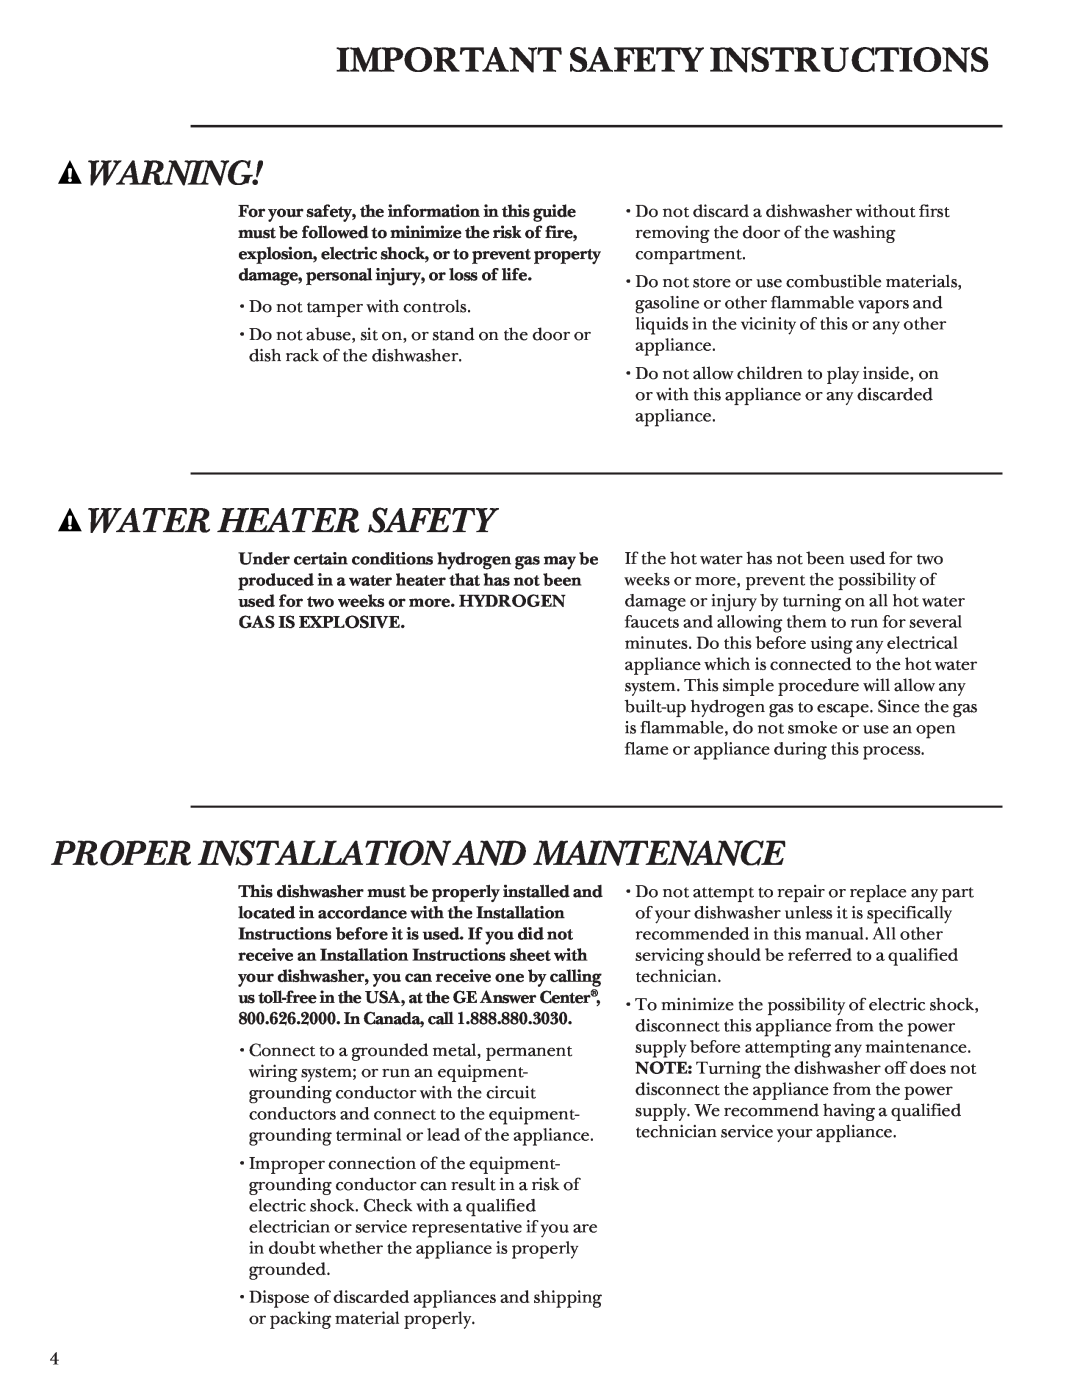 GE ZBD5600, ZBD5700, ZBD5900 manual Important Safety Instructions, Water Heater Safety, Proper Installation And Maintenance 